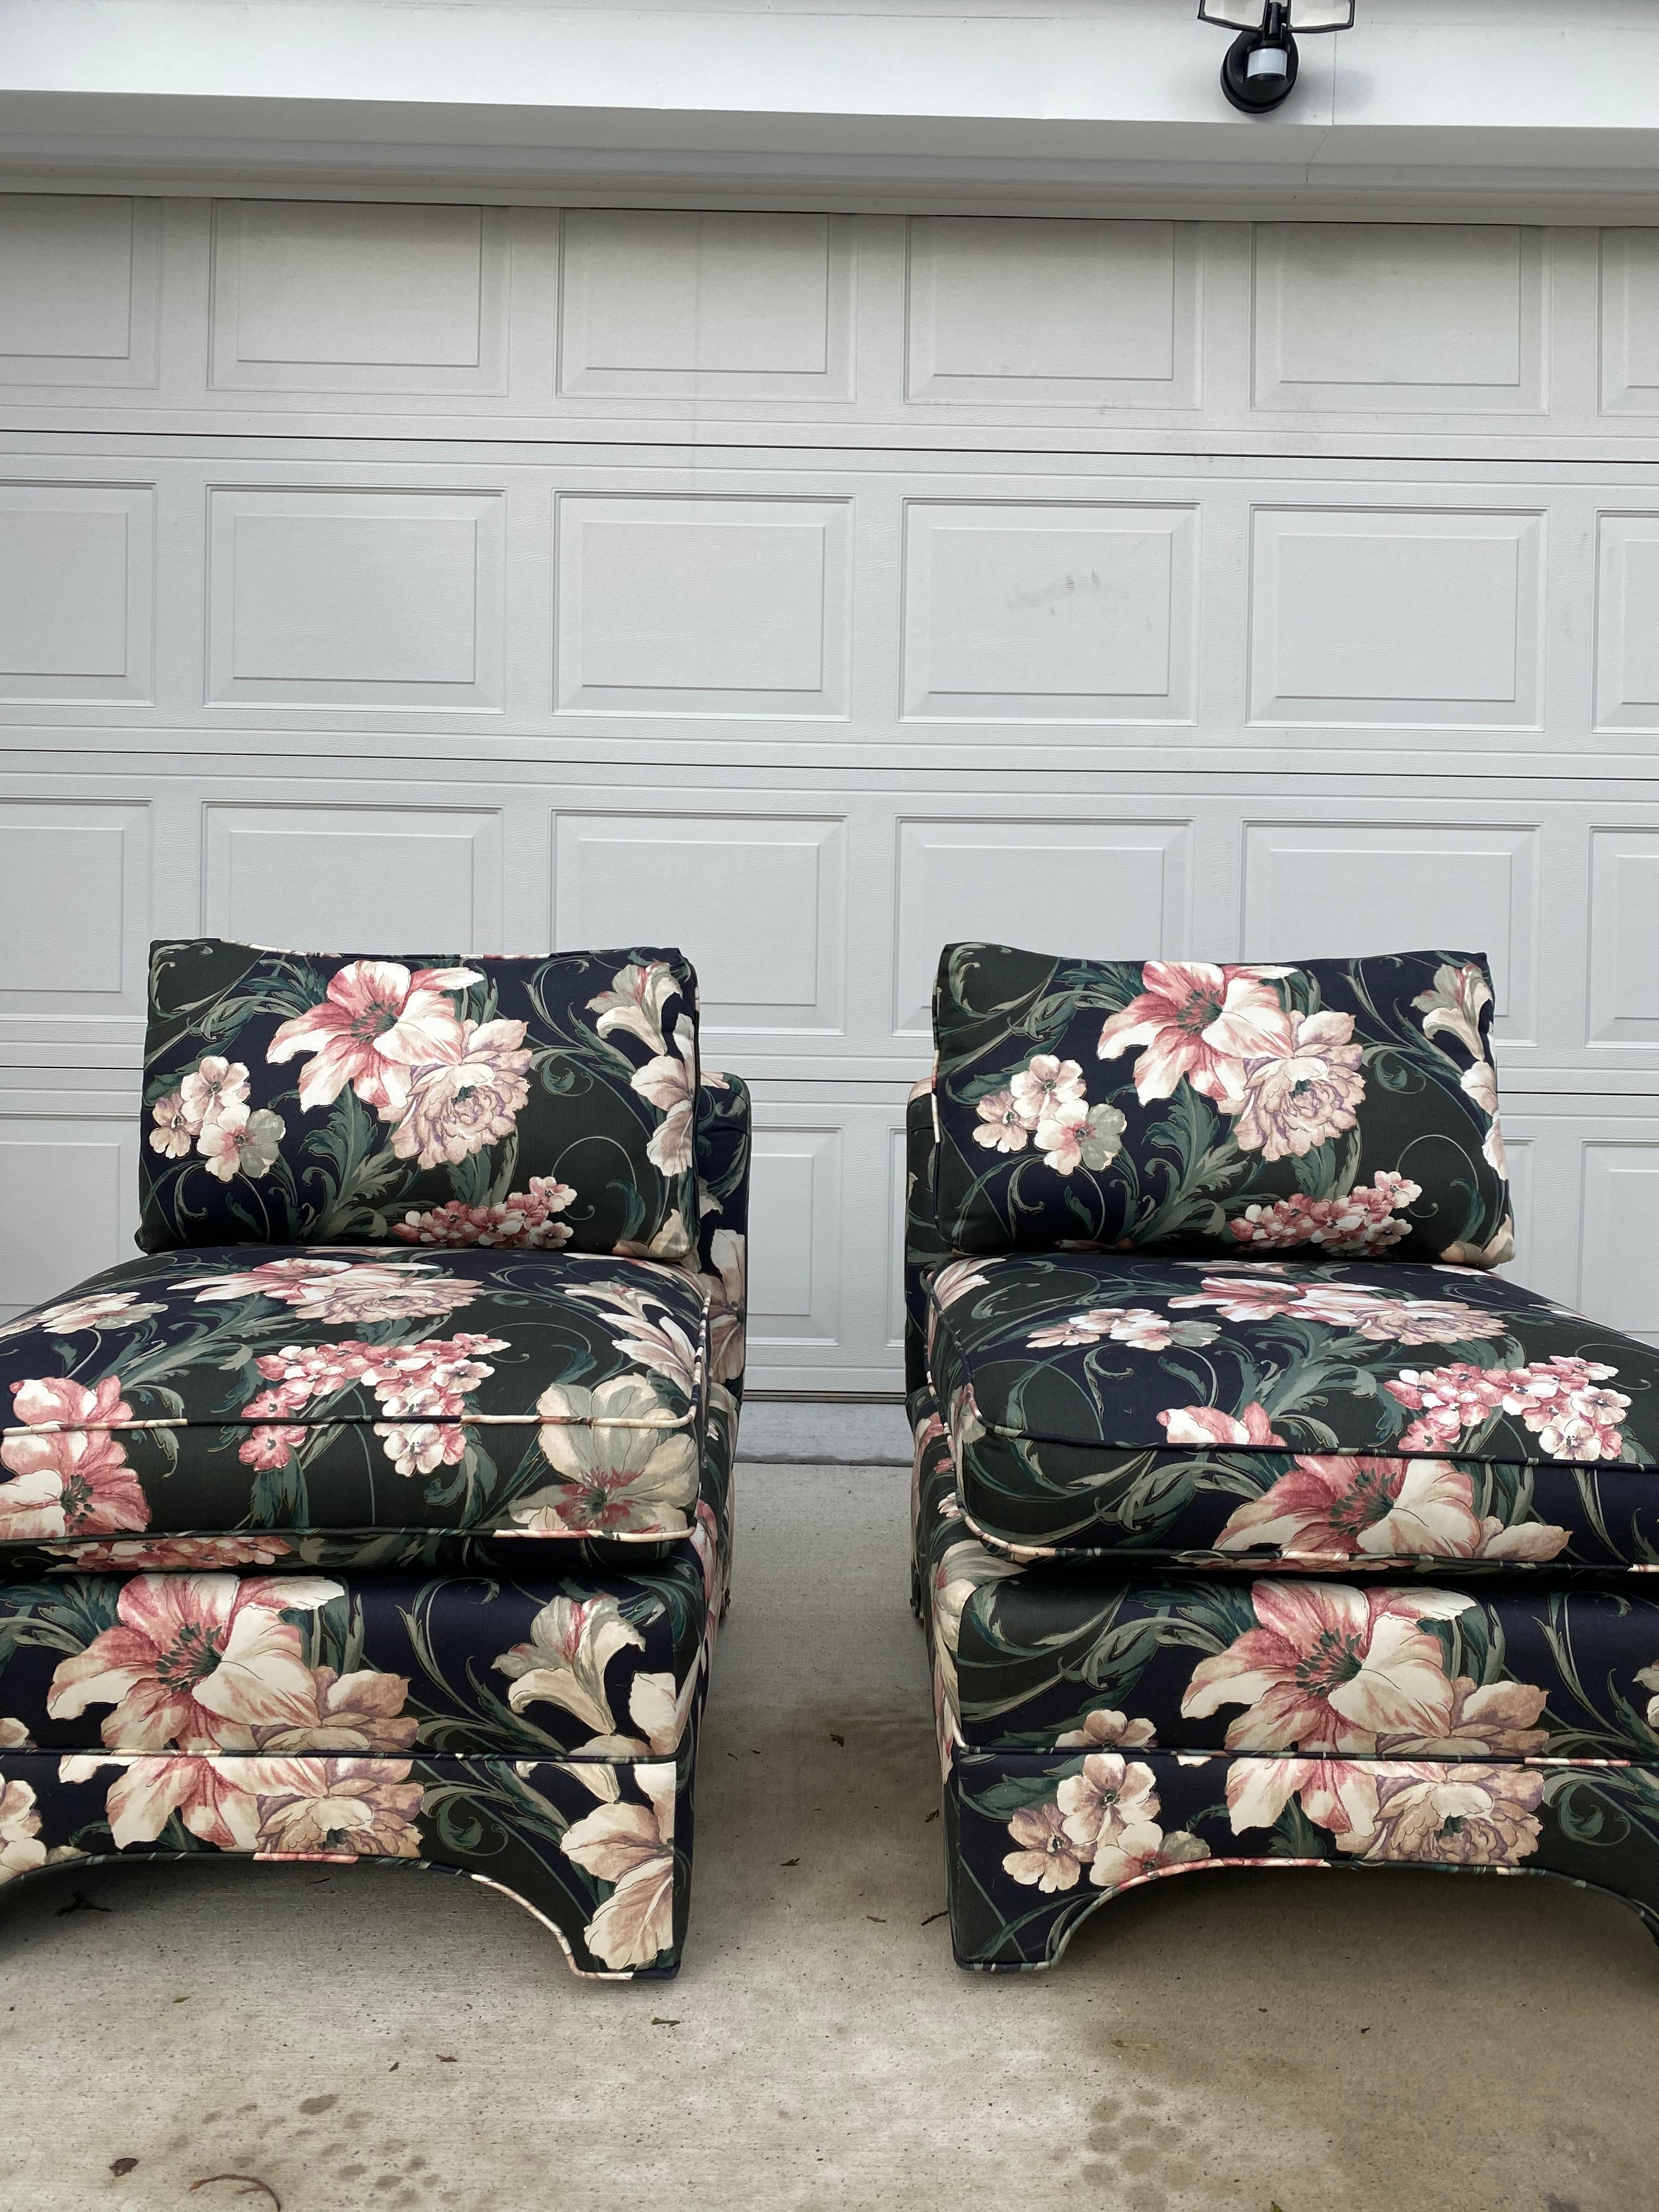 Pair of vintage Century lounge chairs in floral fabric. No physical tears but does need cleaning at it is from a pet-friendly home. It was reupholstered with its last owner. We recommend reupholstery to bring it back to its original beauty. Let us